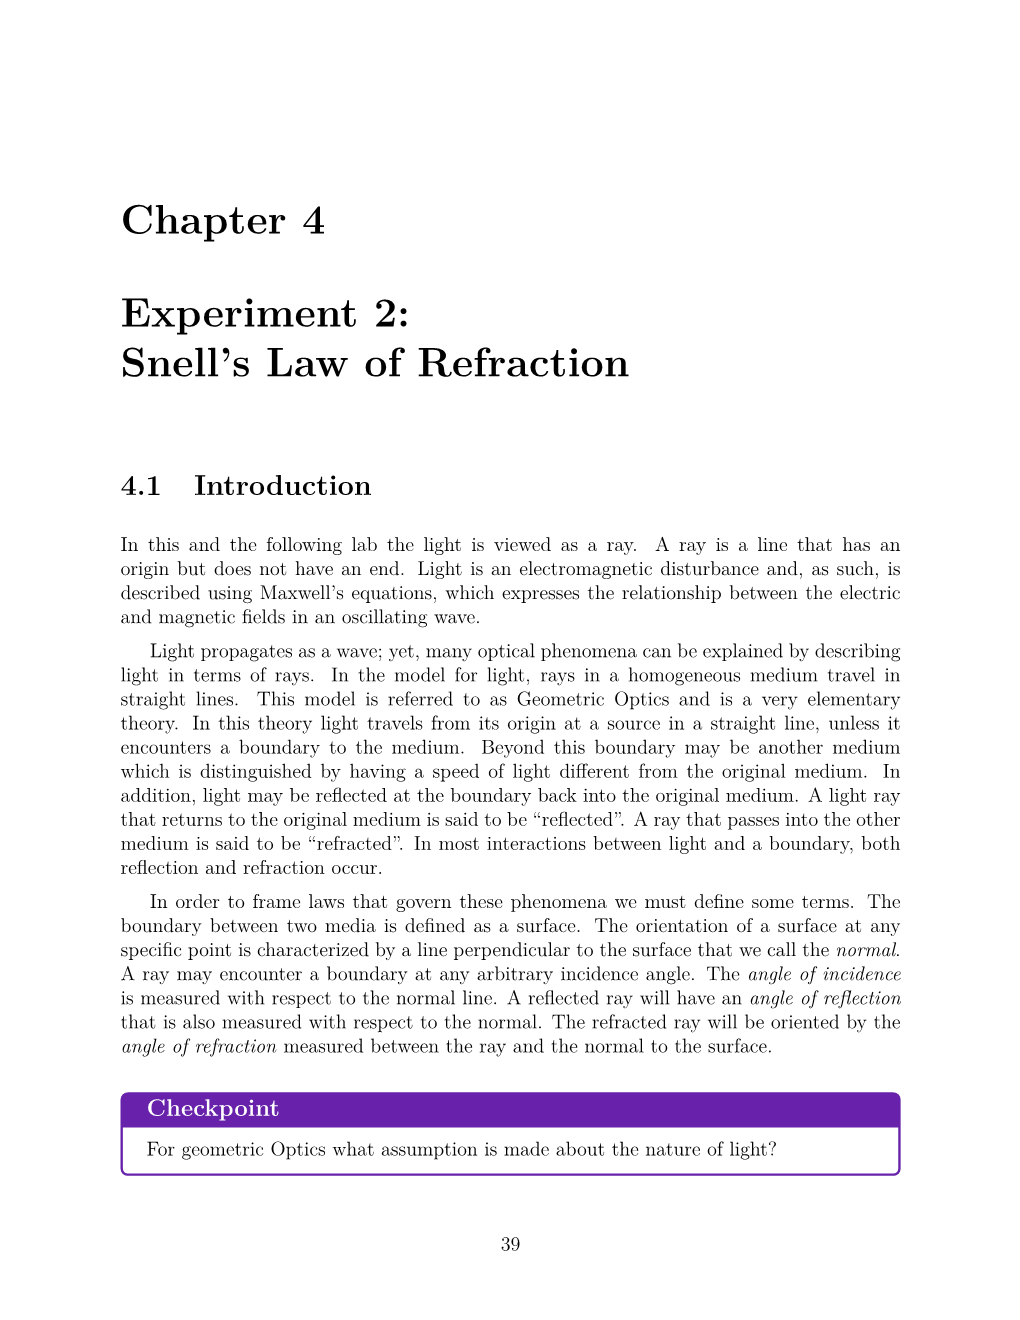 Chapter 4 Experiment 2: Snell's Law of Refraction